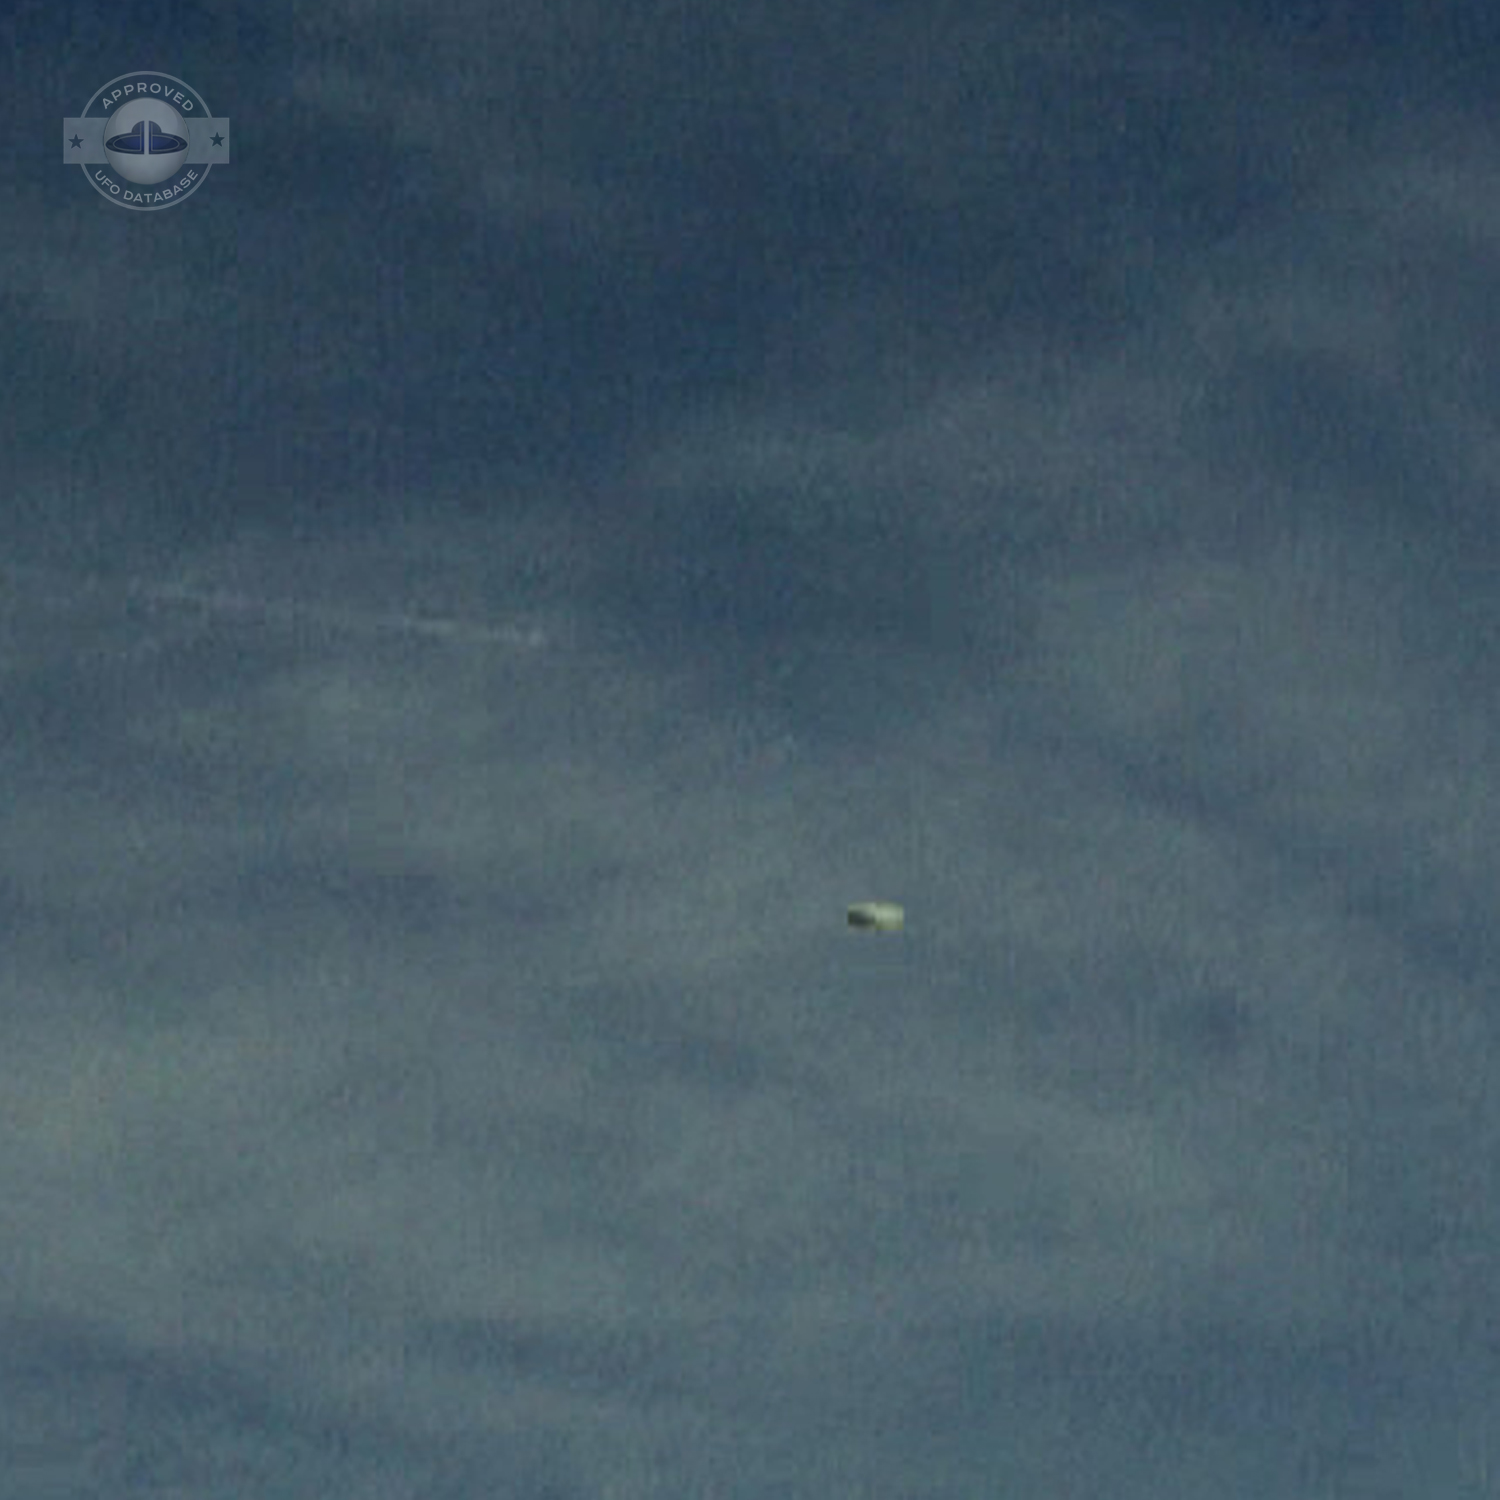 UFO Faster than anything on Earth caught on Video frame | Germany 2011 UFO Picture #213-3